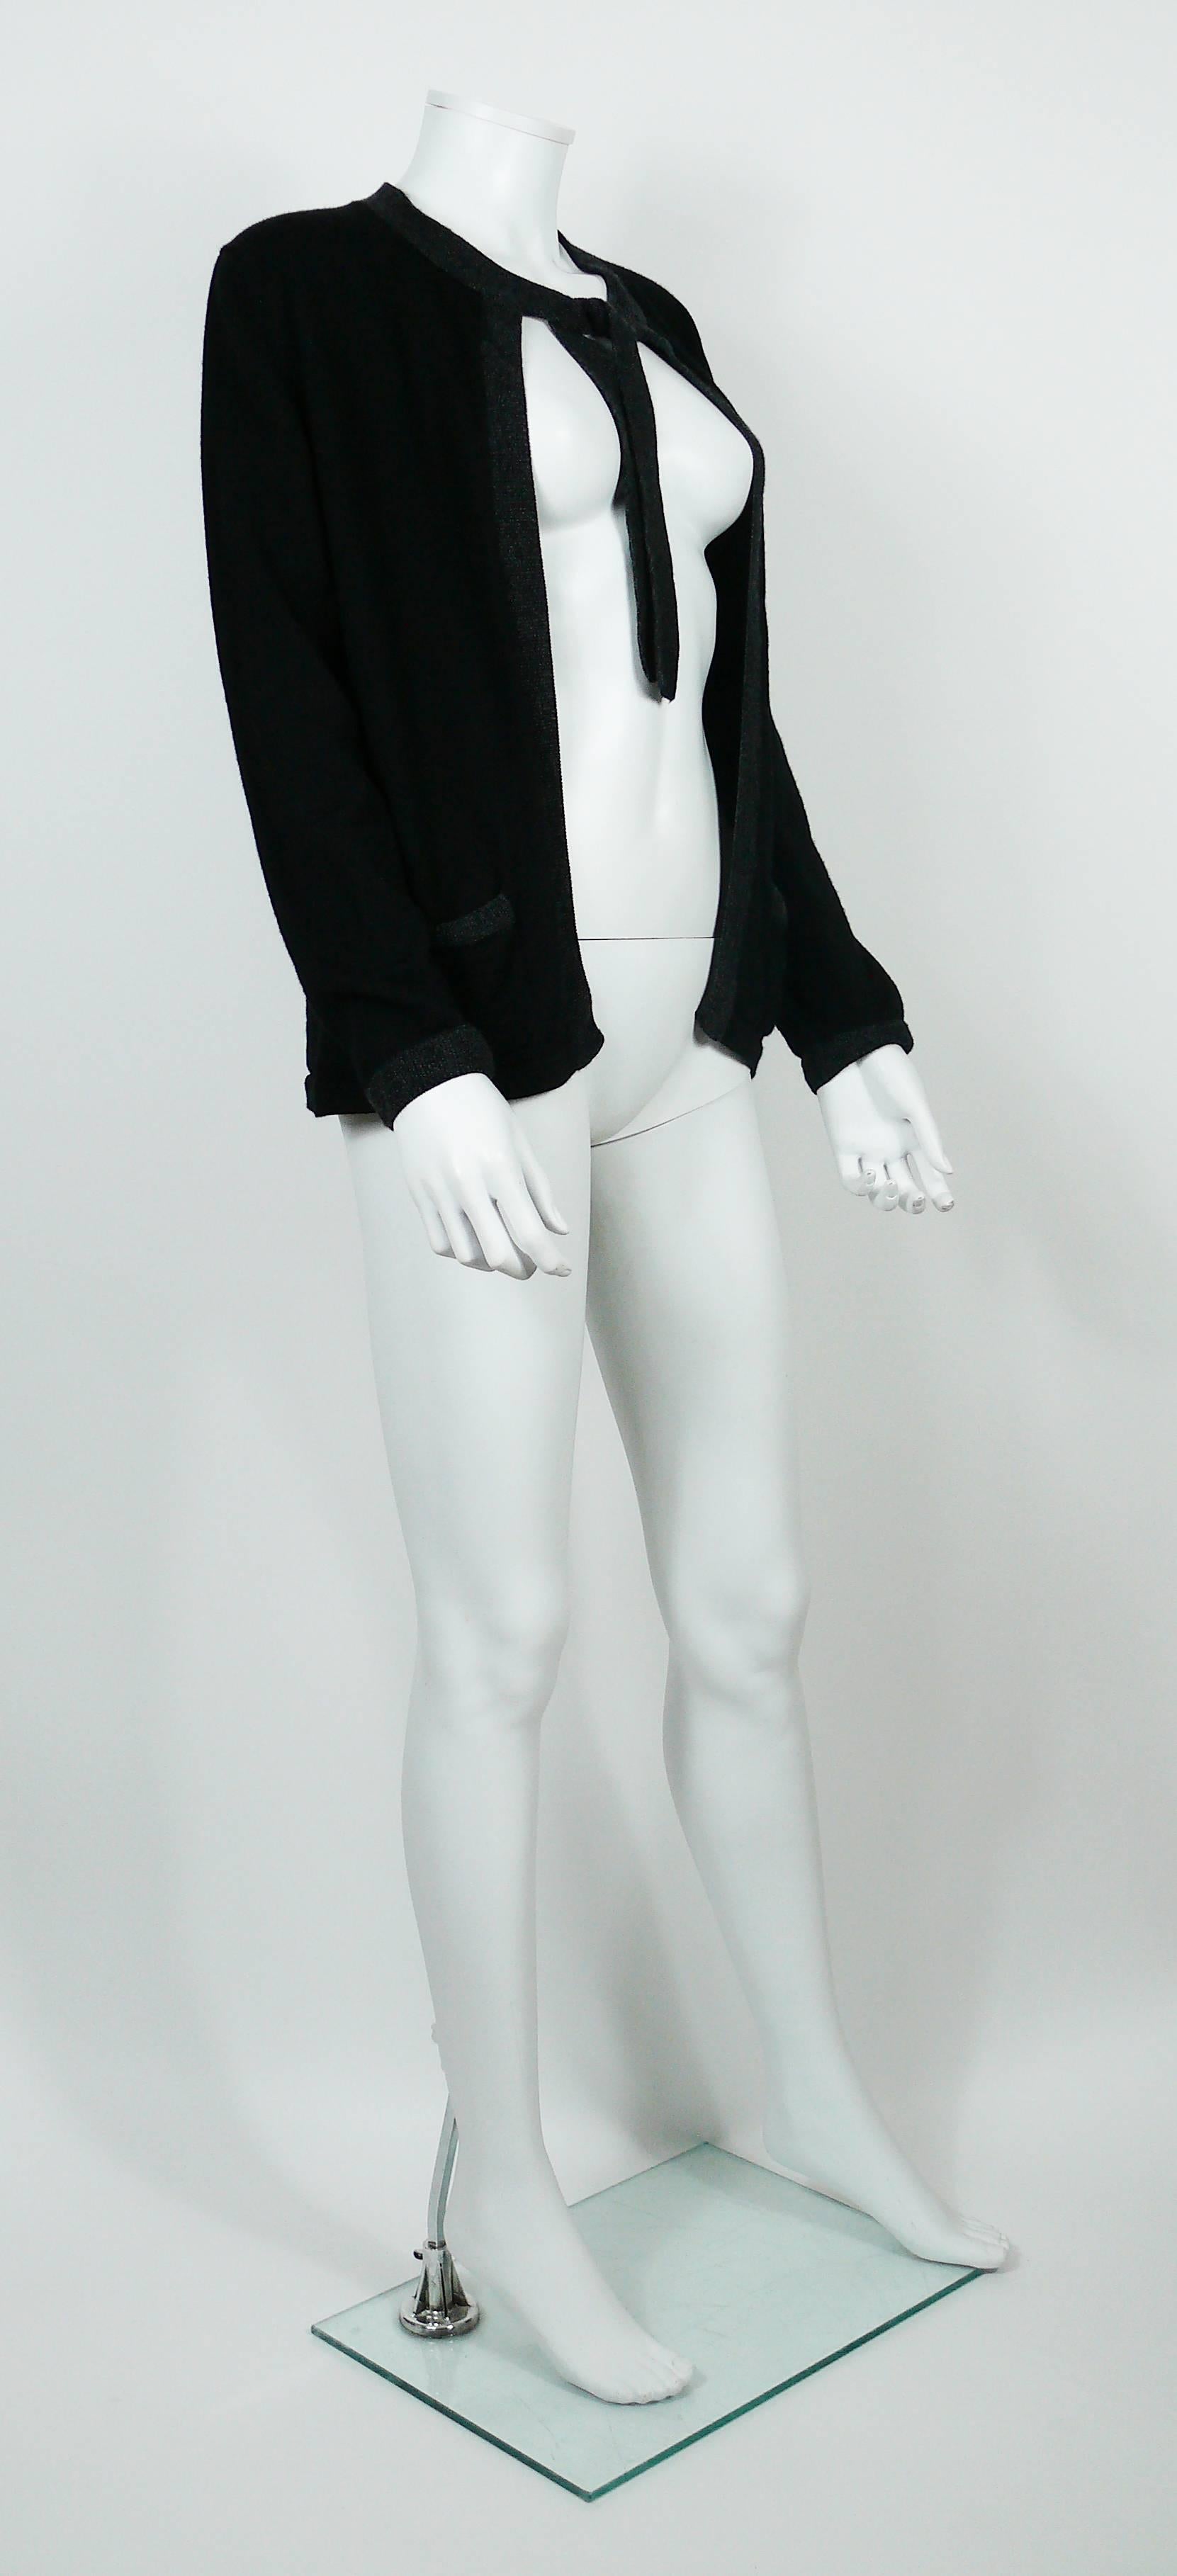 CHANEL Uniform black wool cardigan with grey trim and CC logo detail on left pocket.

Please note this item was original part of a CHANEL employee uniform.

Label reads CHANEL UNIFORM.
Made in China.

Size tag reads : M.
Please refer to